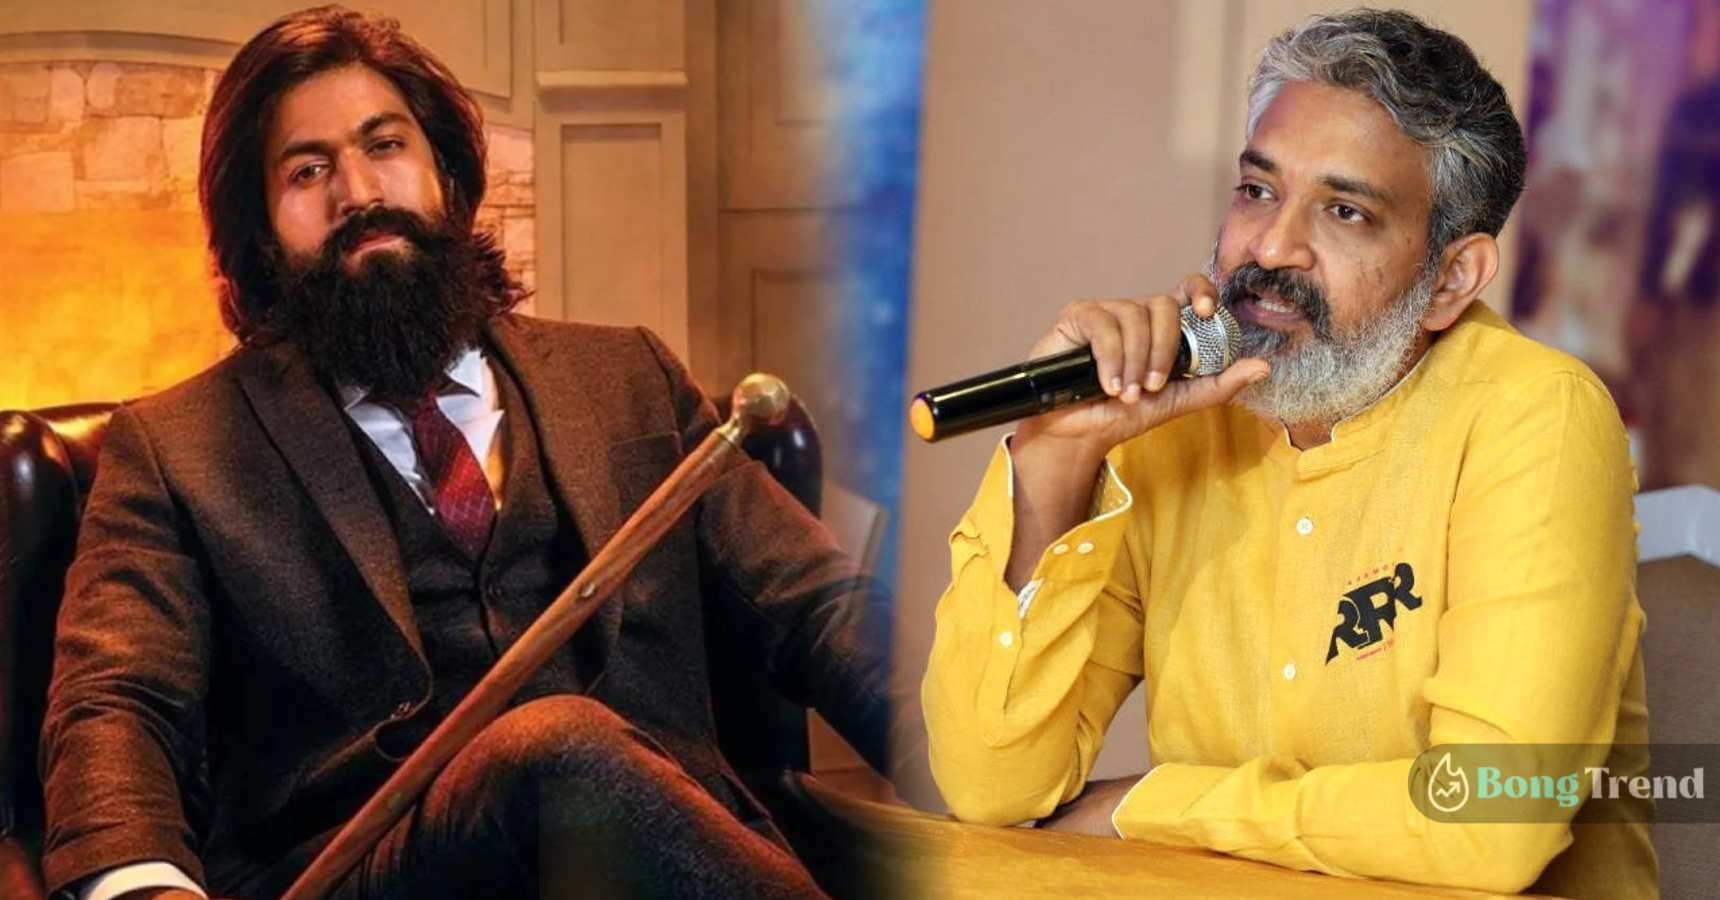 Rocky Bhai actor yash changed in KGF rumours on social media